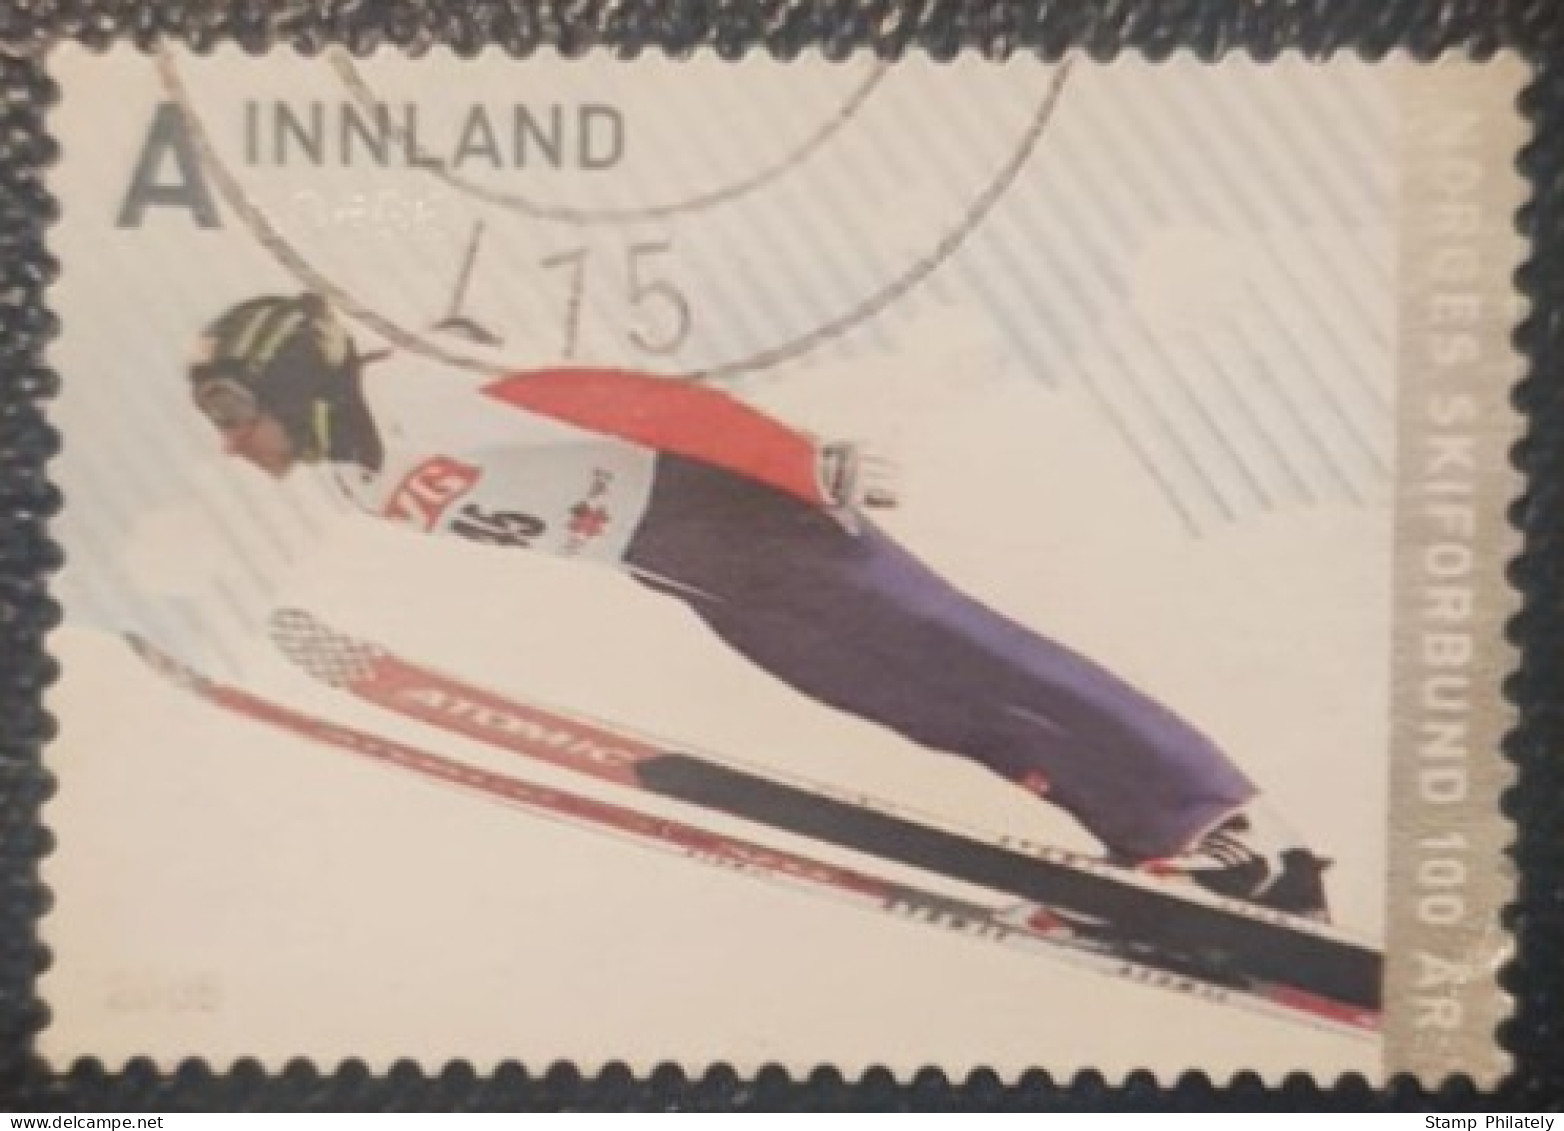 Norway Anniversary Ski Federation Used - Used Stamps